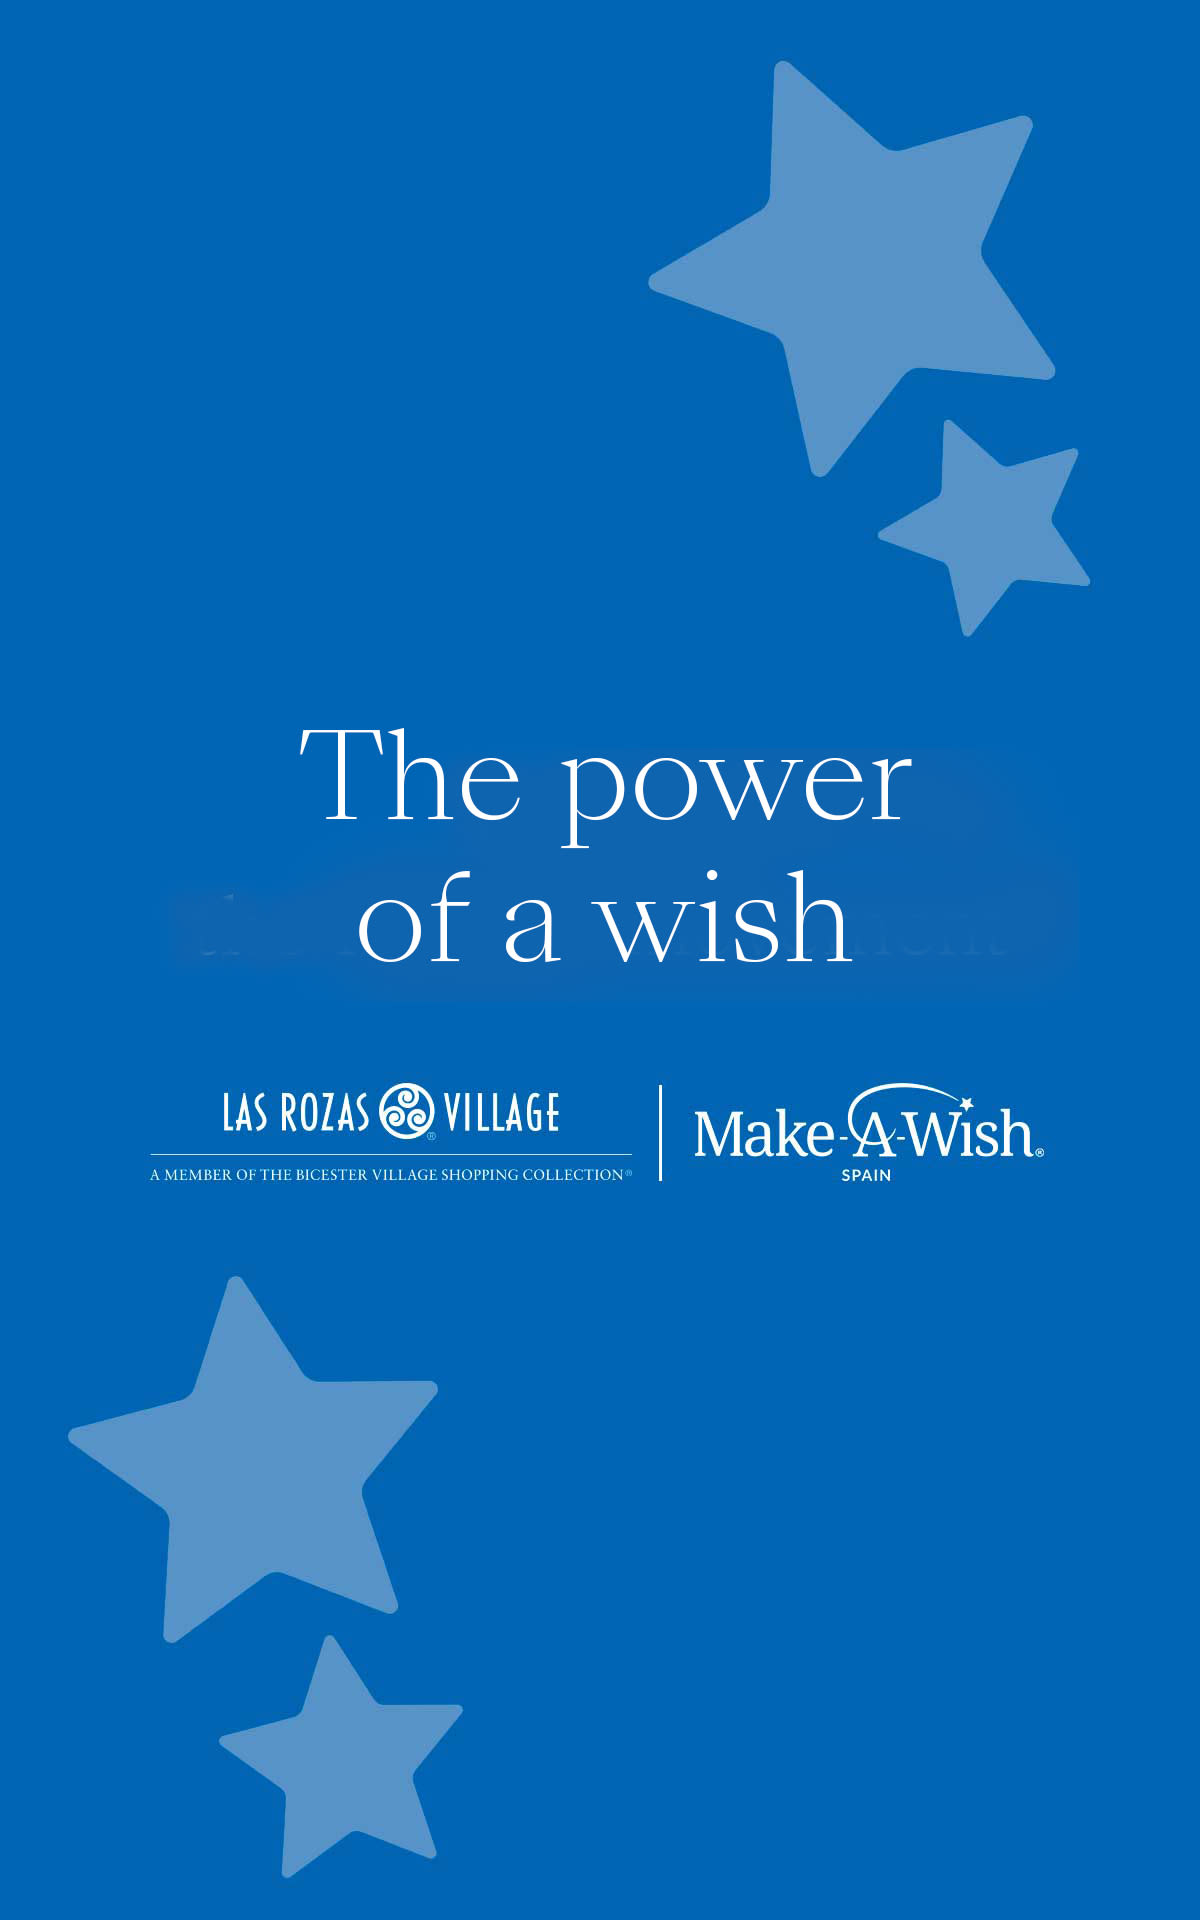 We join the illusion movement with Make A Wish